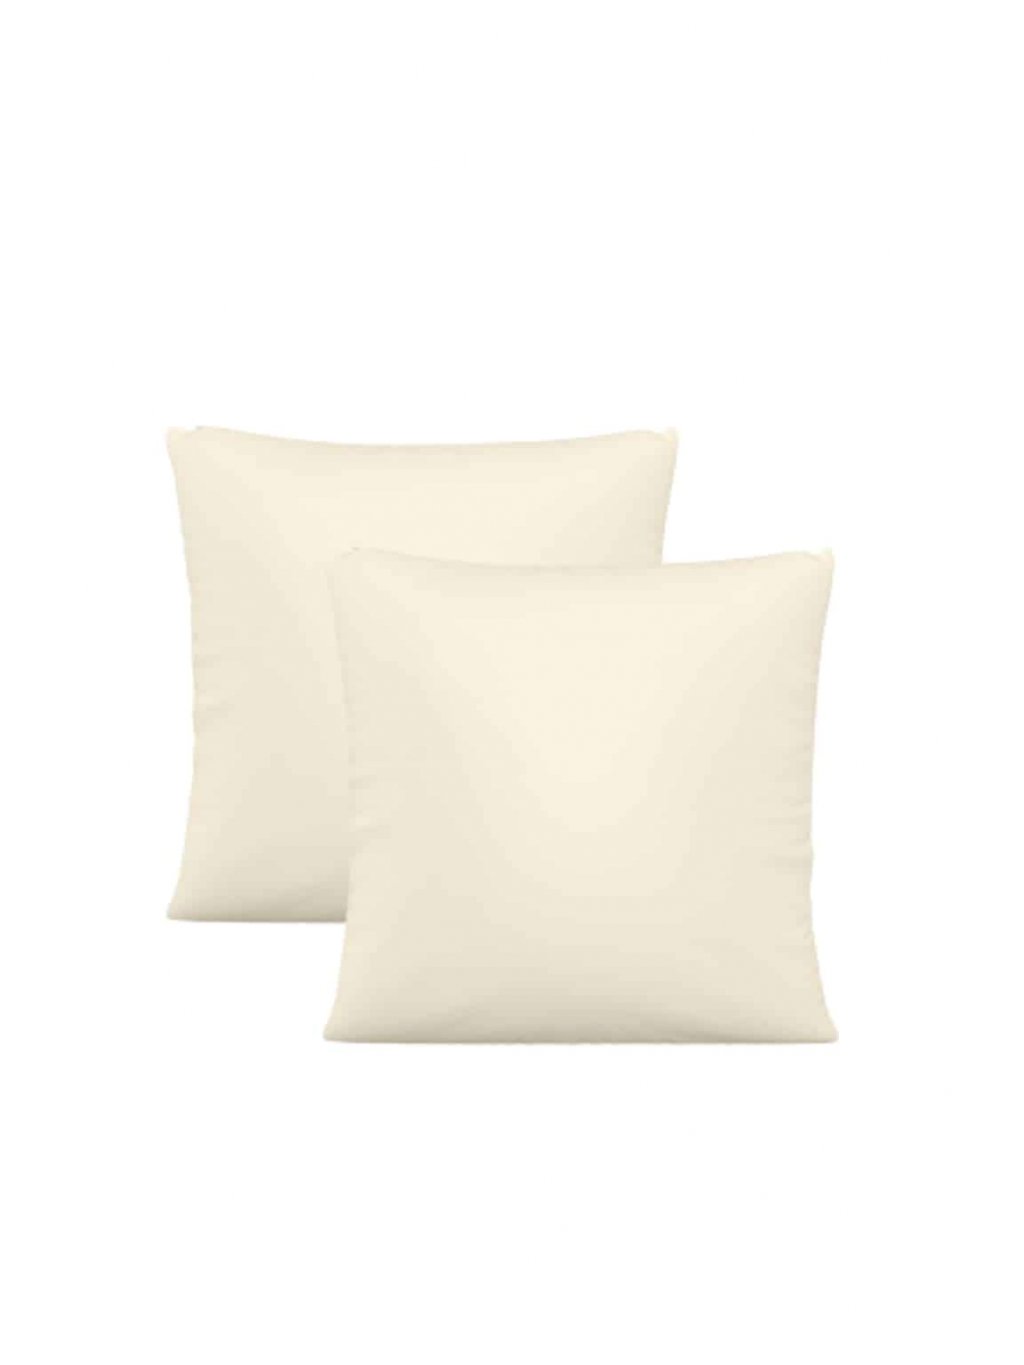 2 Pack) Anti-Dust Mite and Allergen Proof Pillowcases